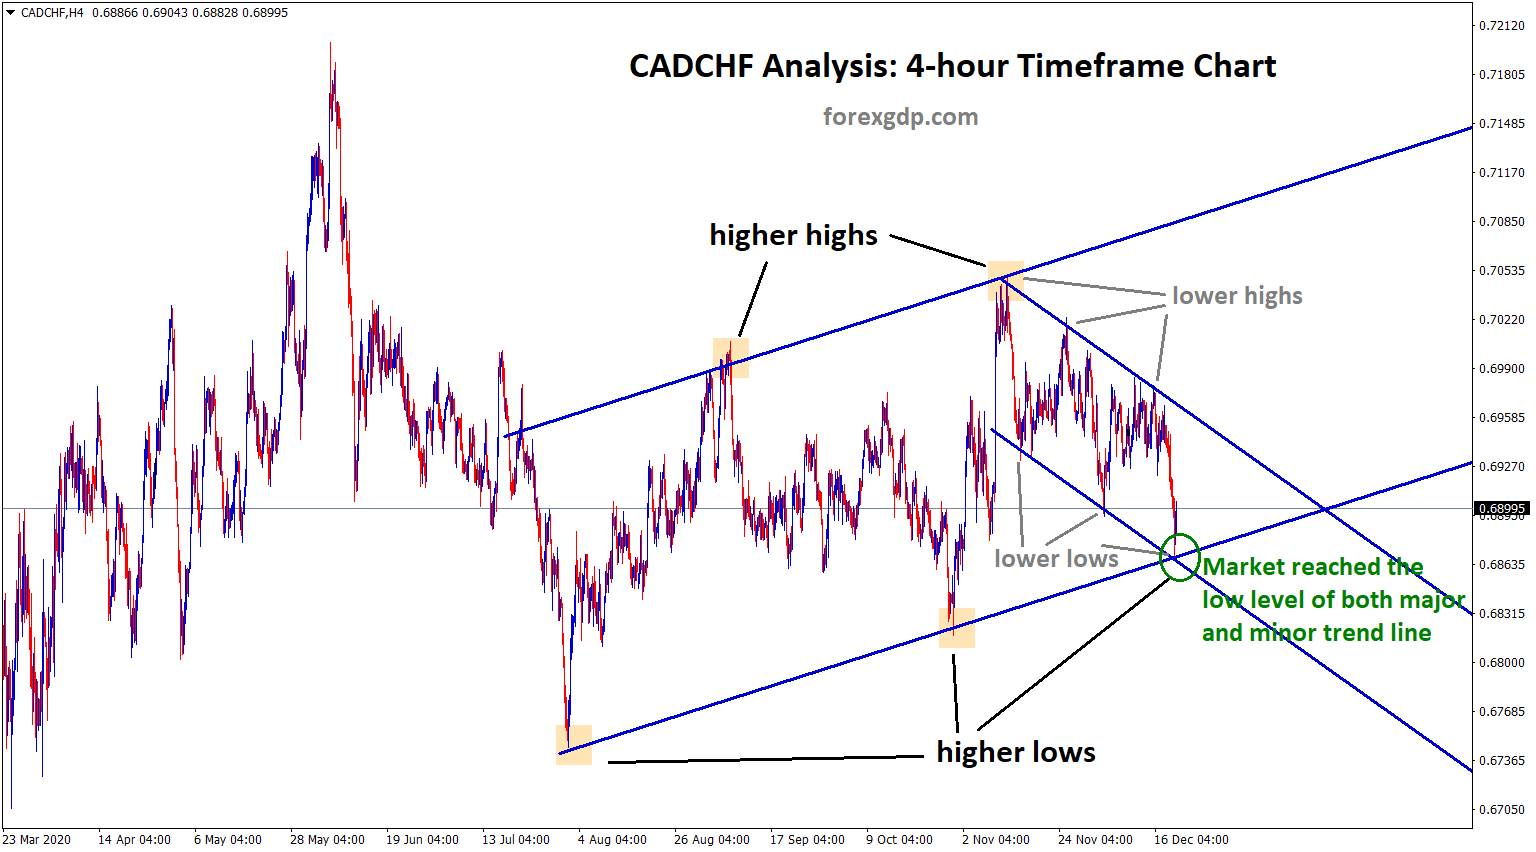 cadchf reached the low of both major and minor trend lines